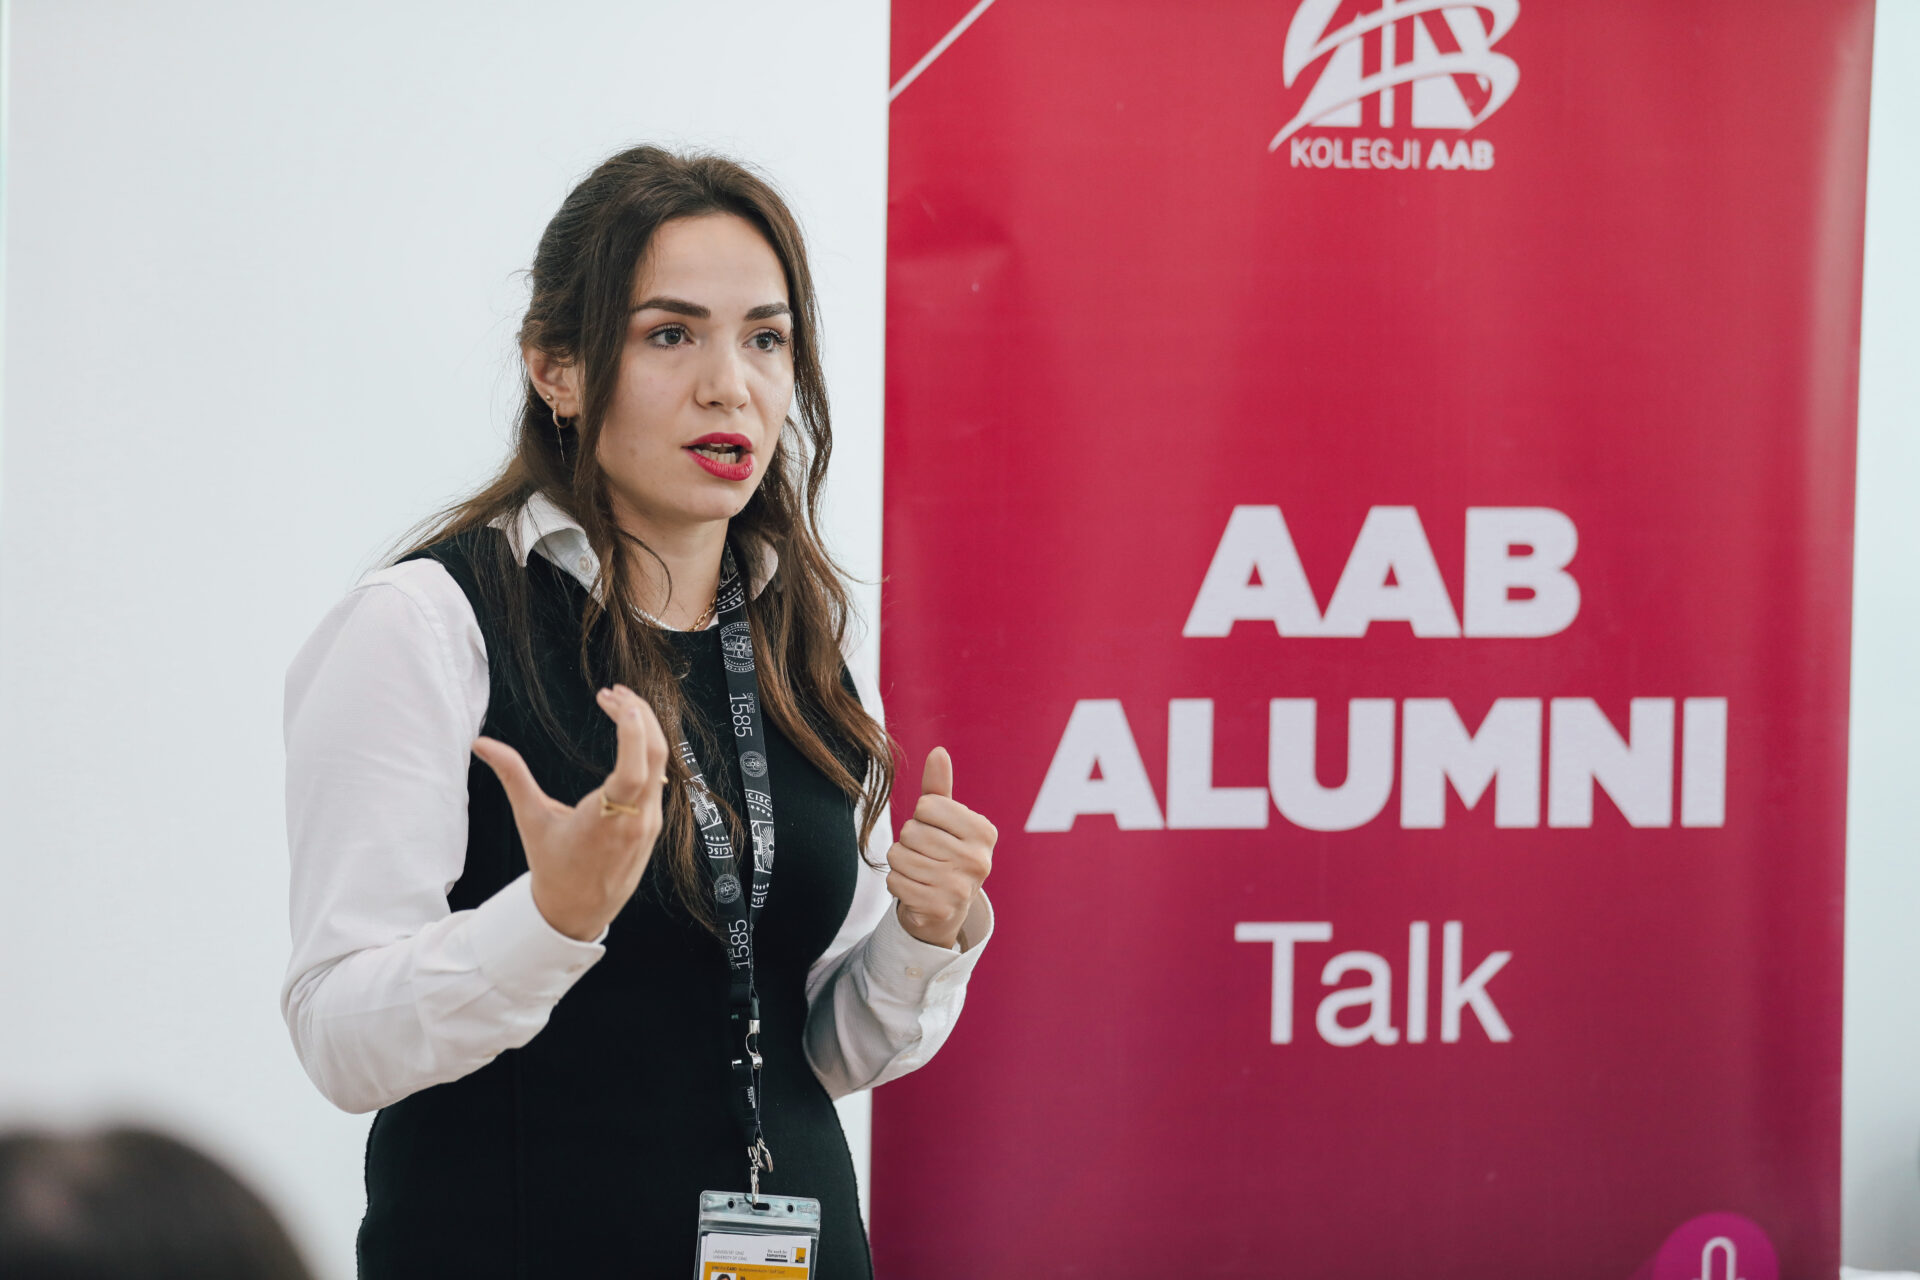 Former AAB College student guest on Alumni Talk - Talks about getting hired as an assistant at the University of Graz